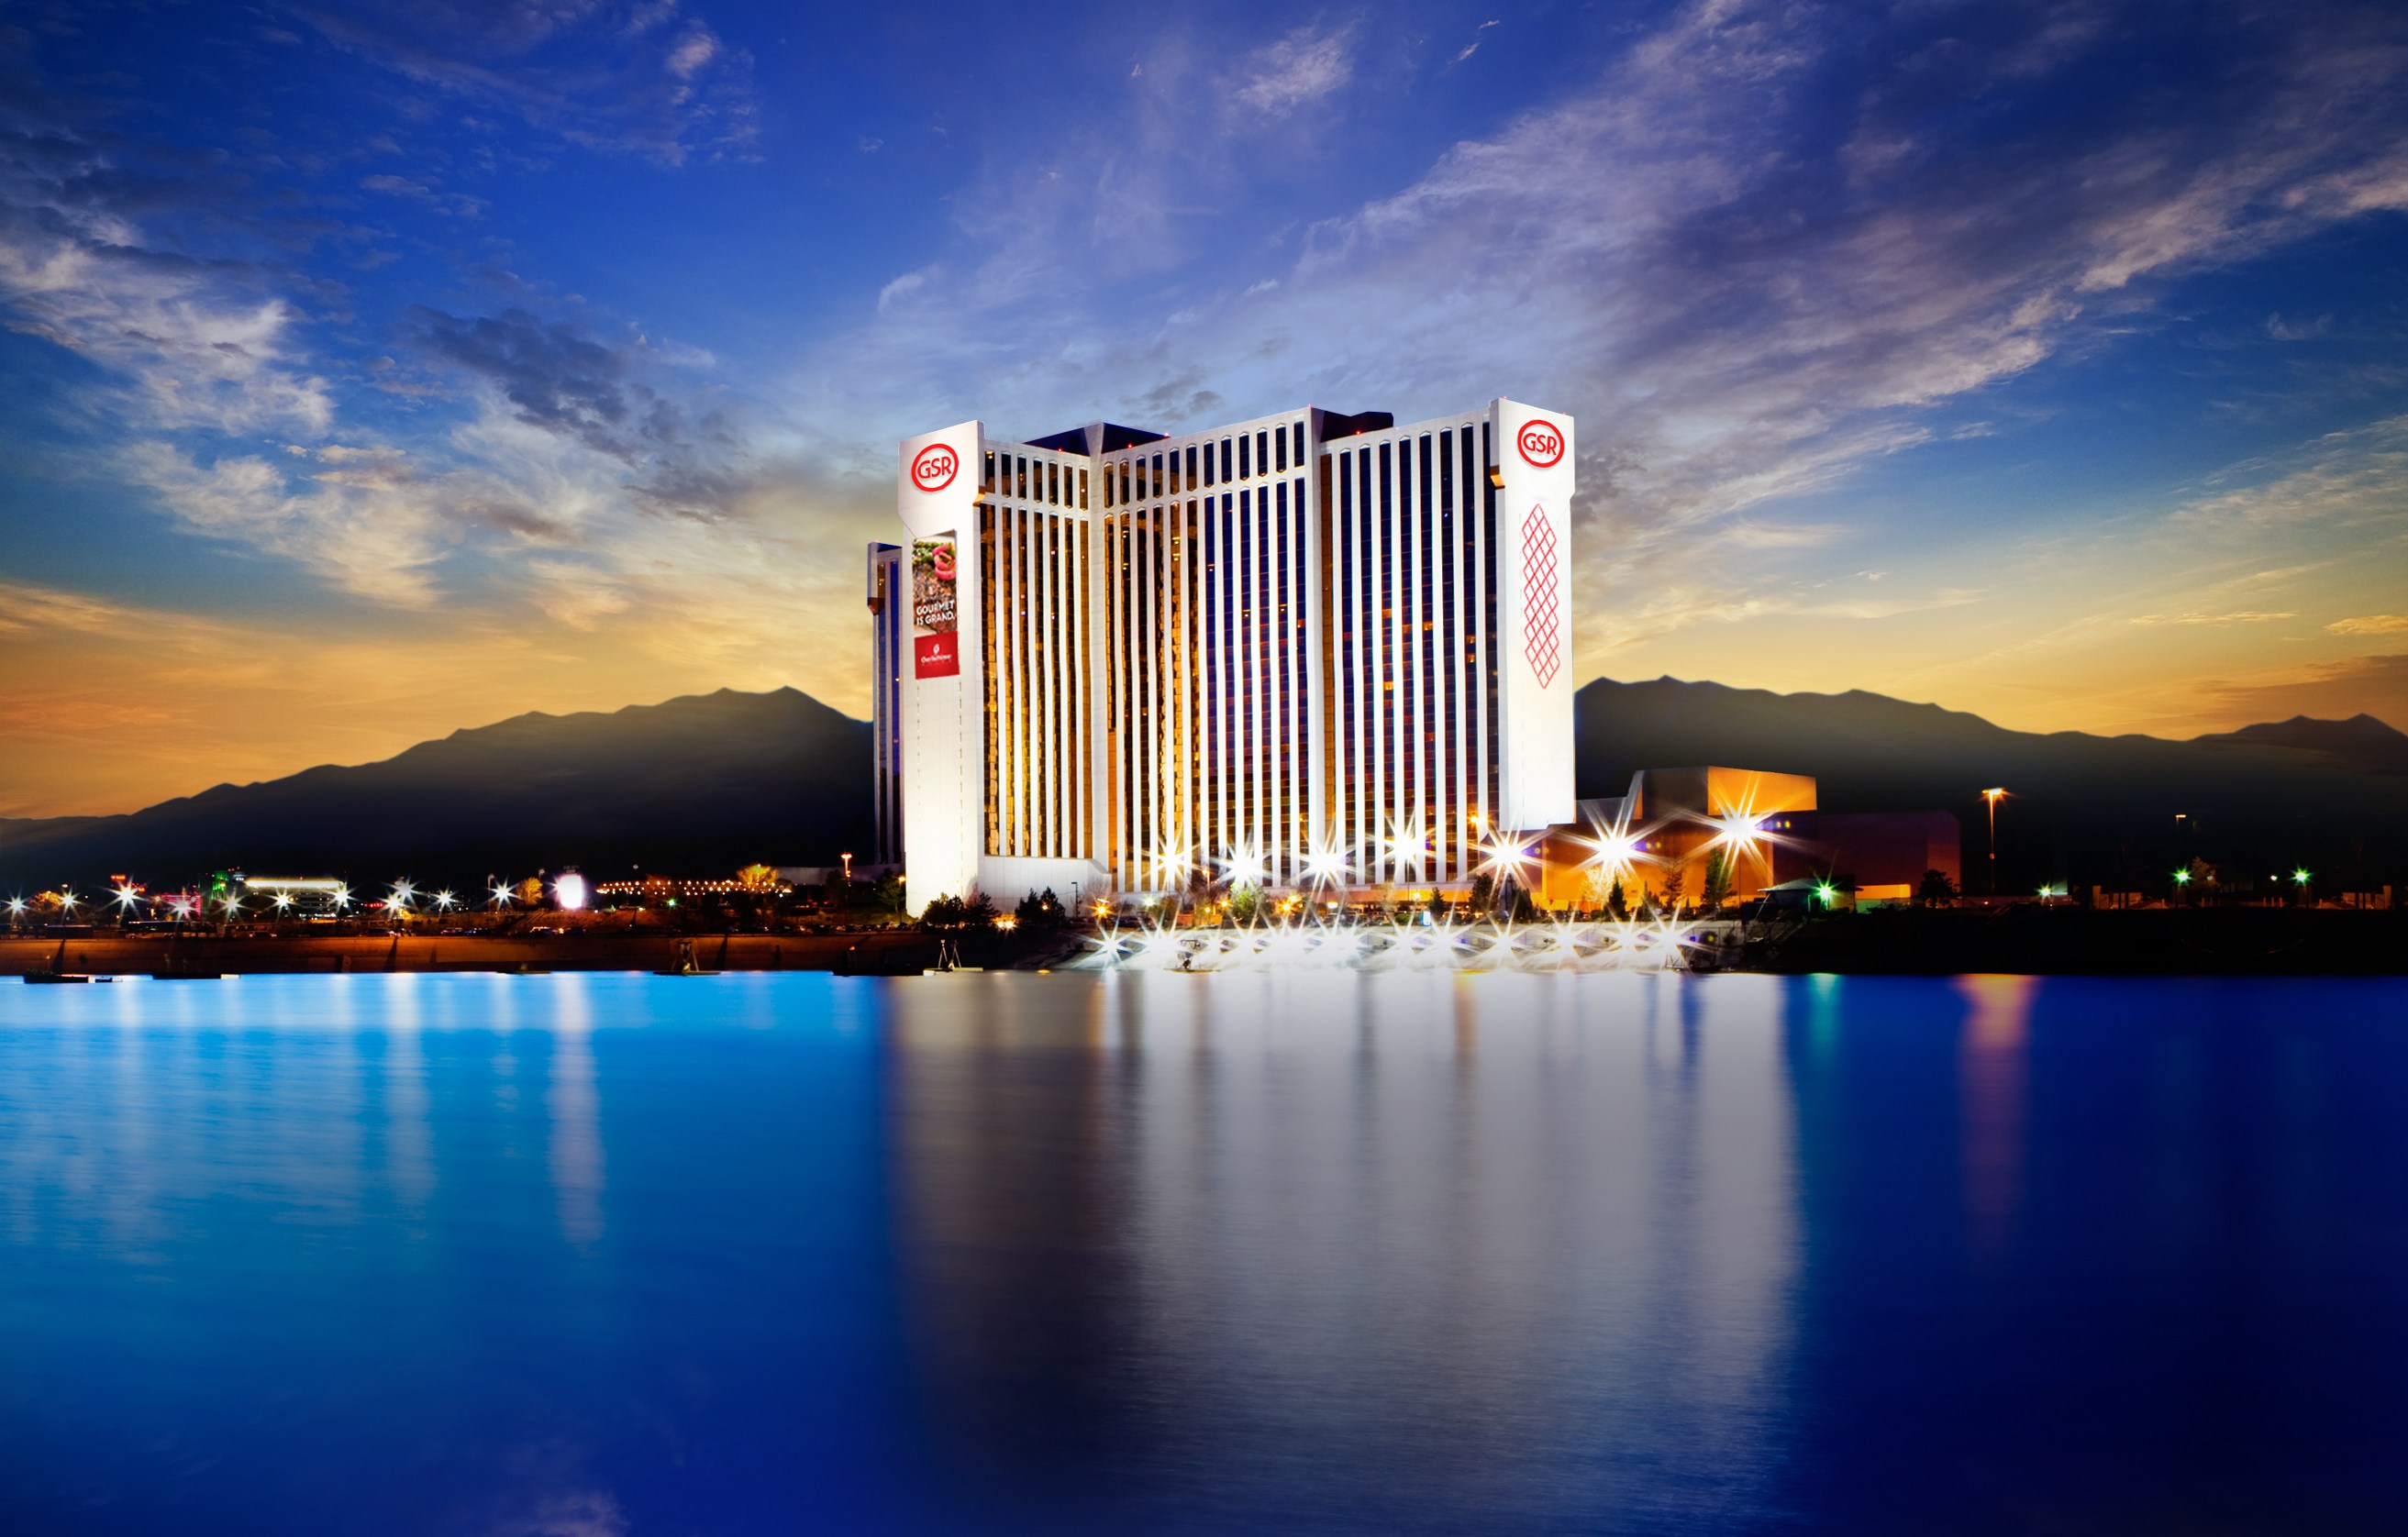 Grand Sierra Resort and Casino upgrades to BLE-enabled locks